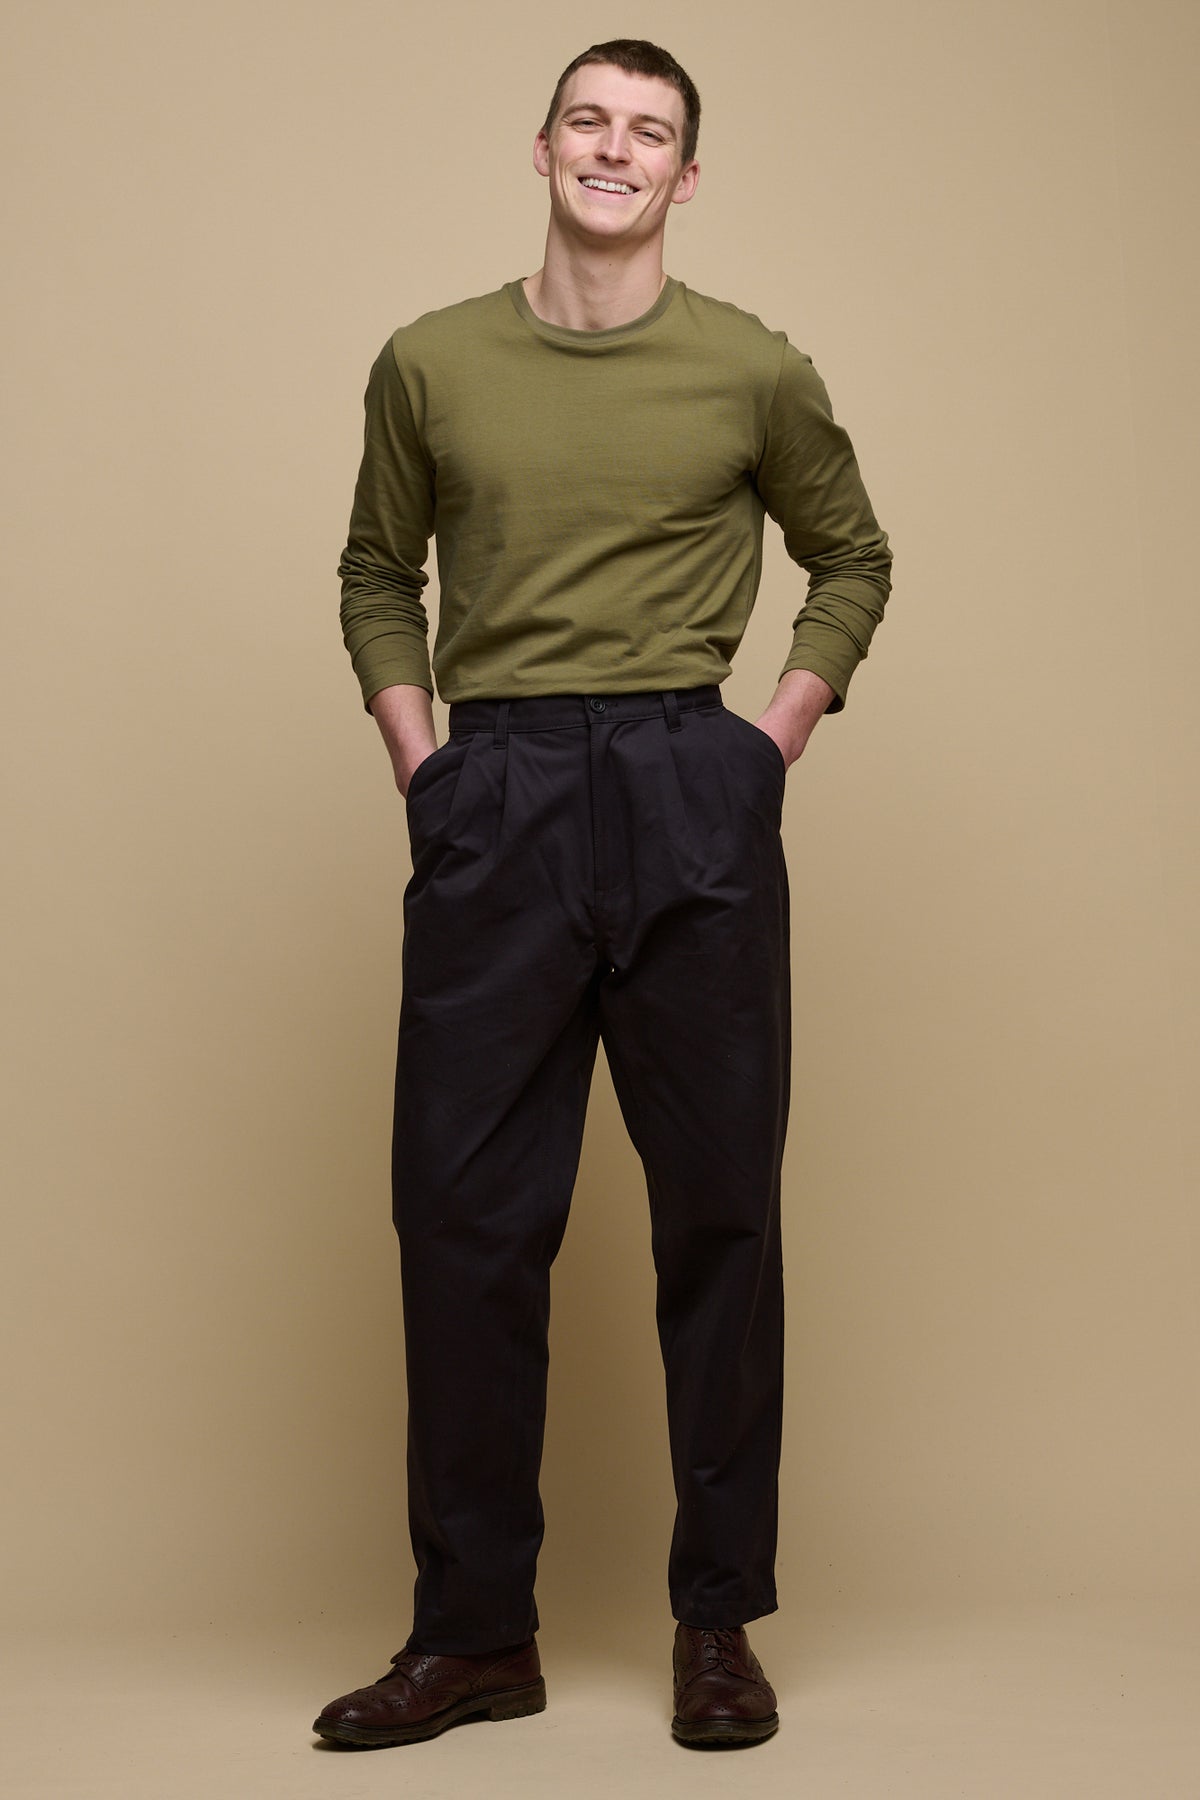 
            Full body image of brunet male wearing pleated cotton chino in navy paired with long sleeve t shirt in olive